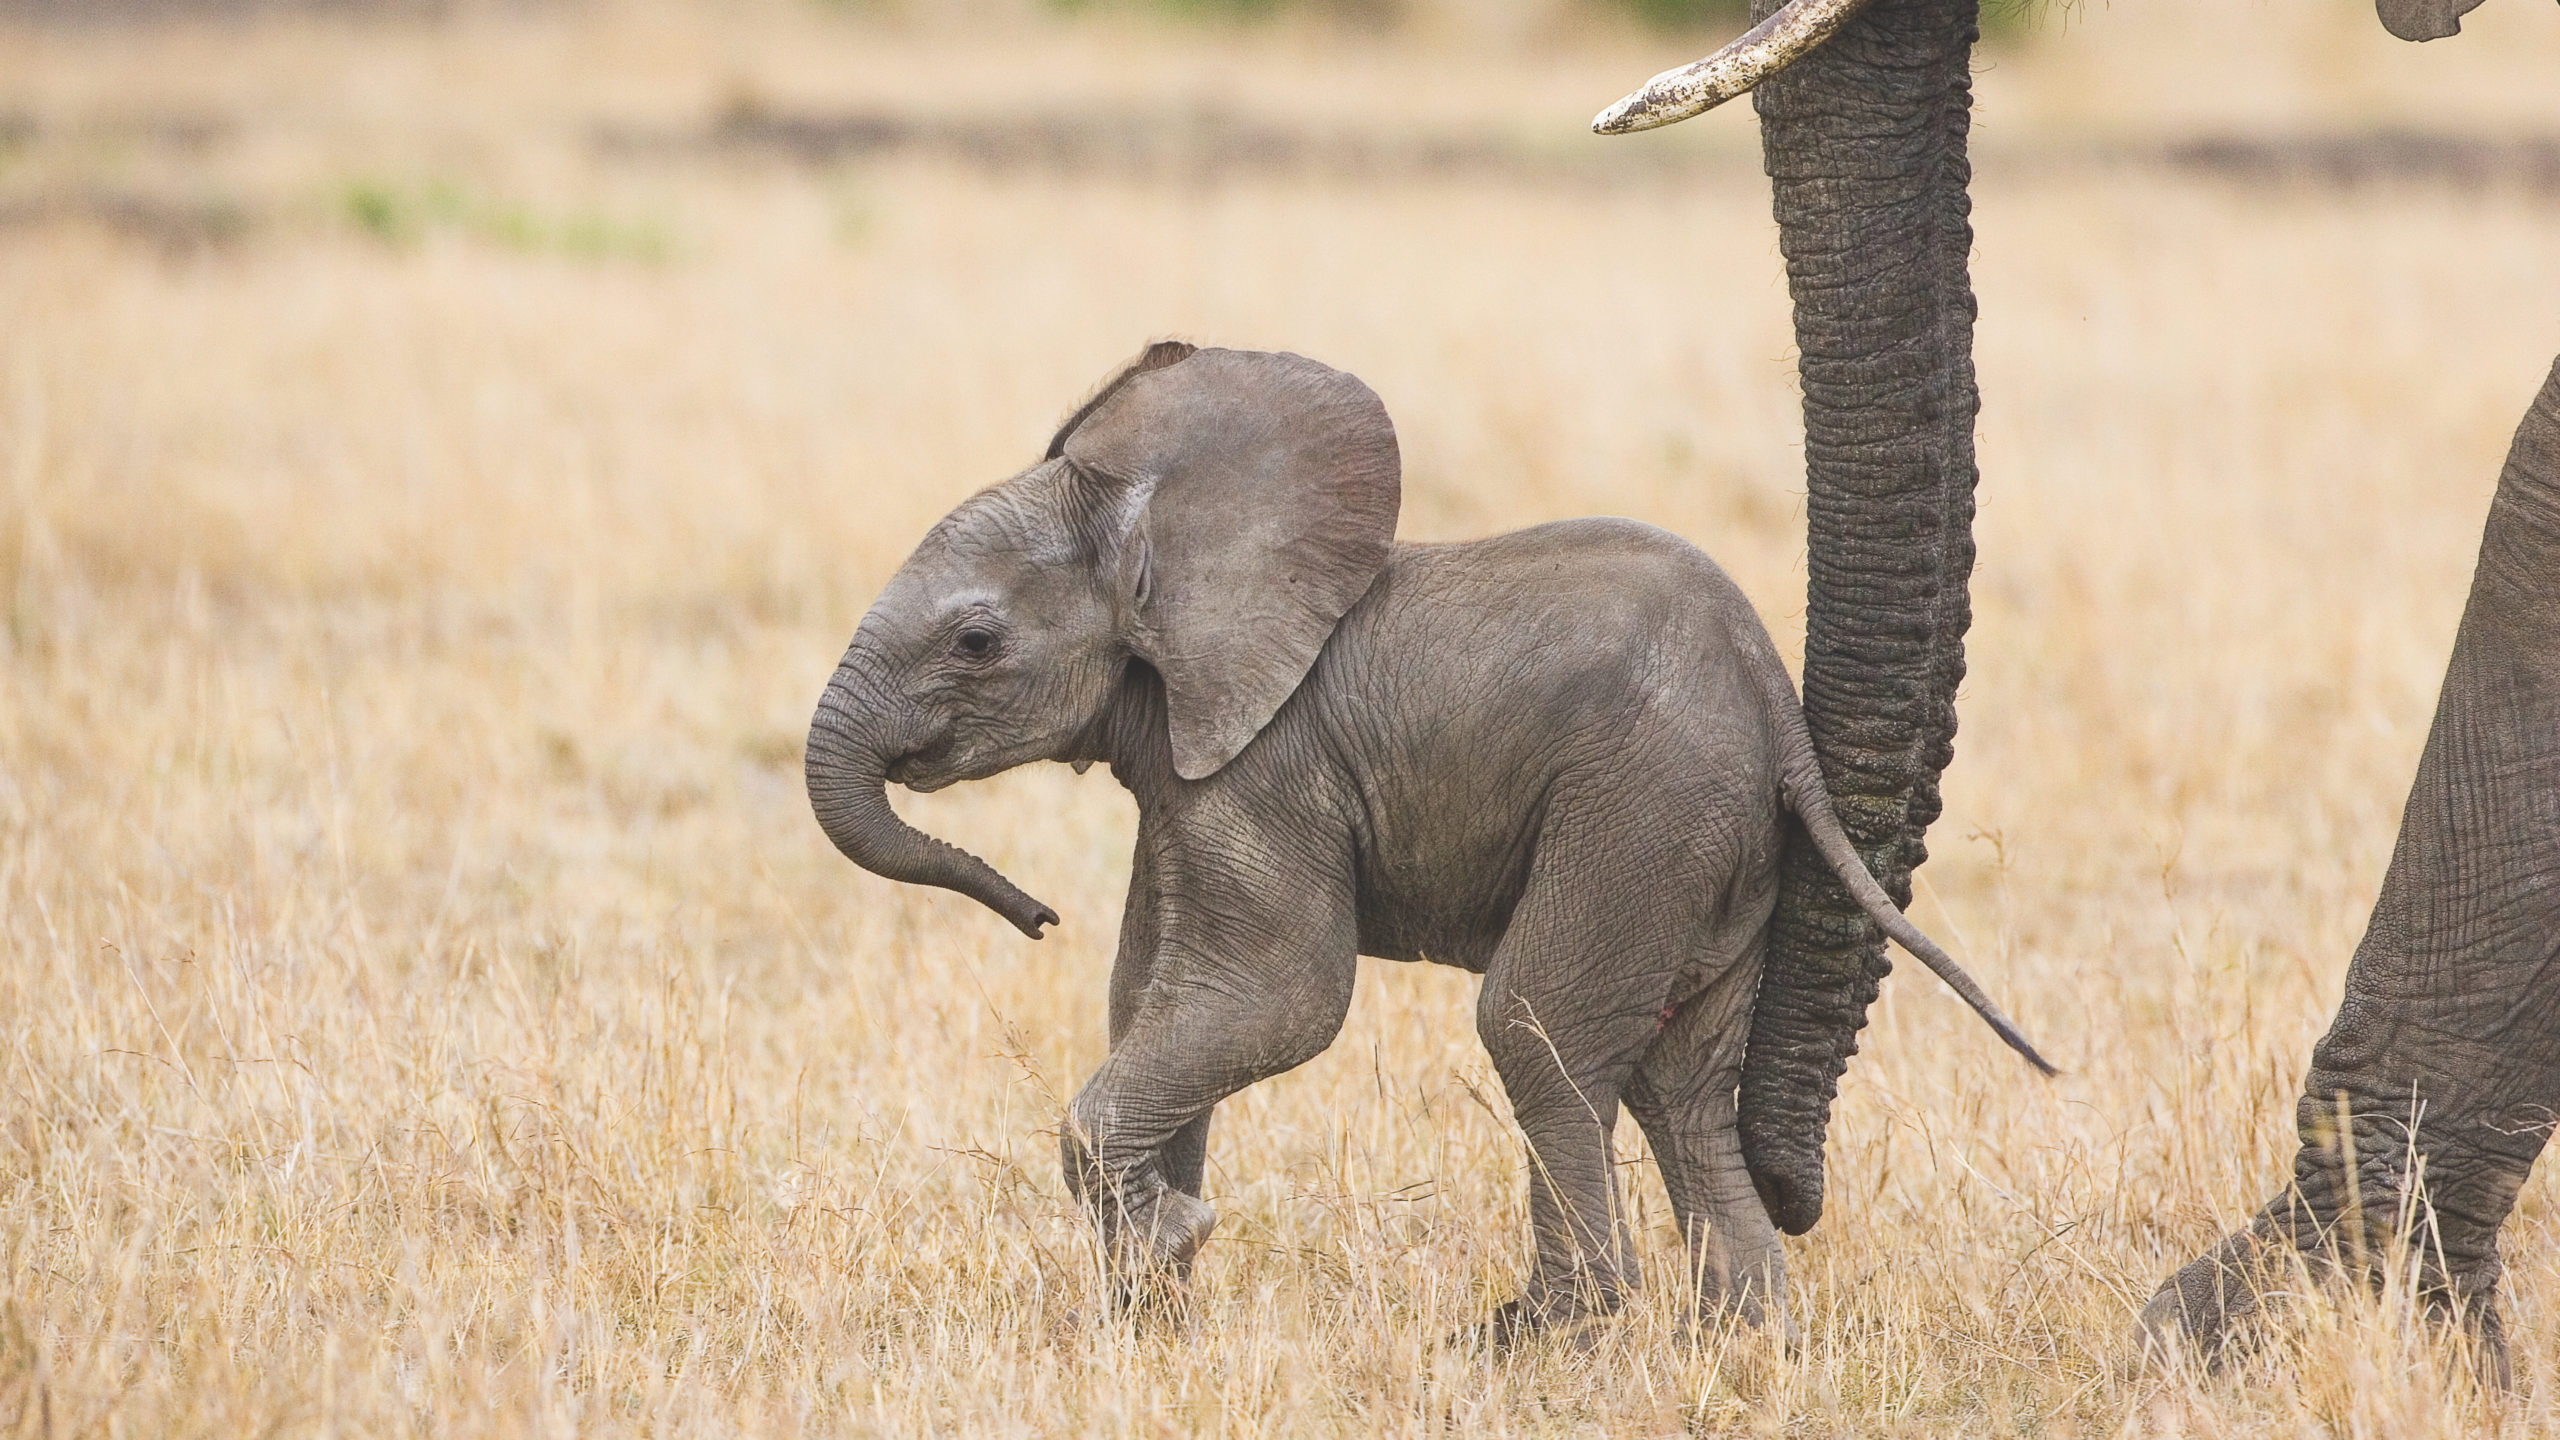 A mother elephant uses her trunk to move her baby along at the Maasai Mara National Reserve. (Photo: Suzi Eszterhas/New On Earth: Baby Animals in the Wild/courtesy of Earth Aware Editions)